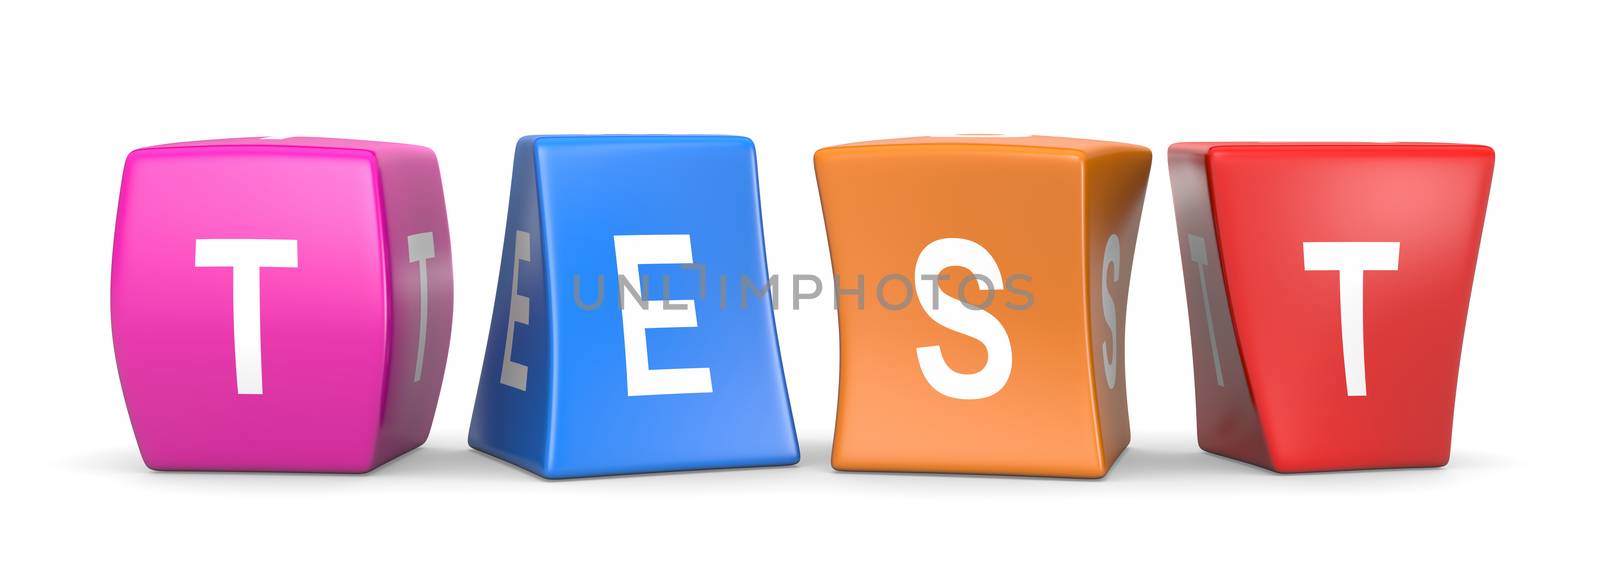 Test White Text on Colorful Deformed Funny Cubes 3D Illustration on White Background